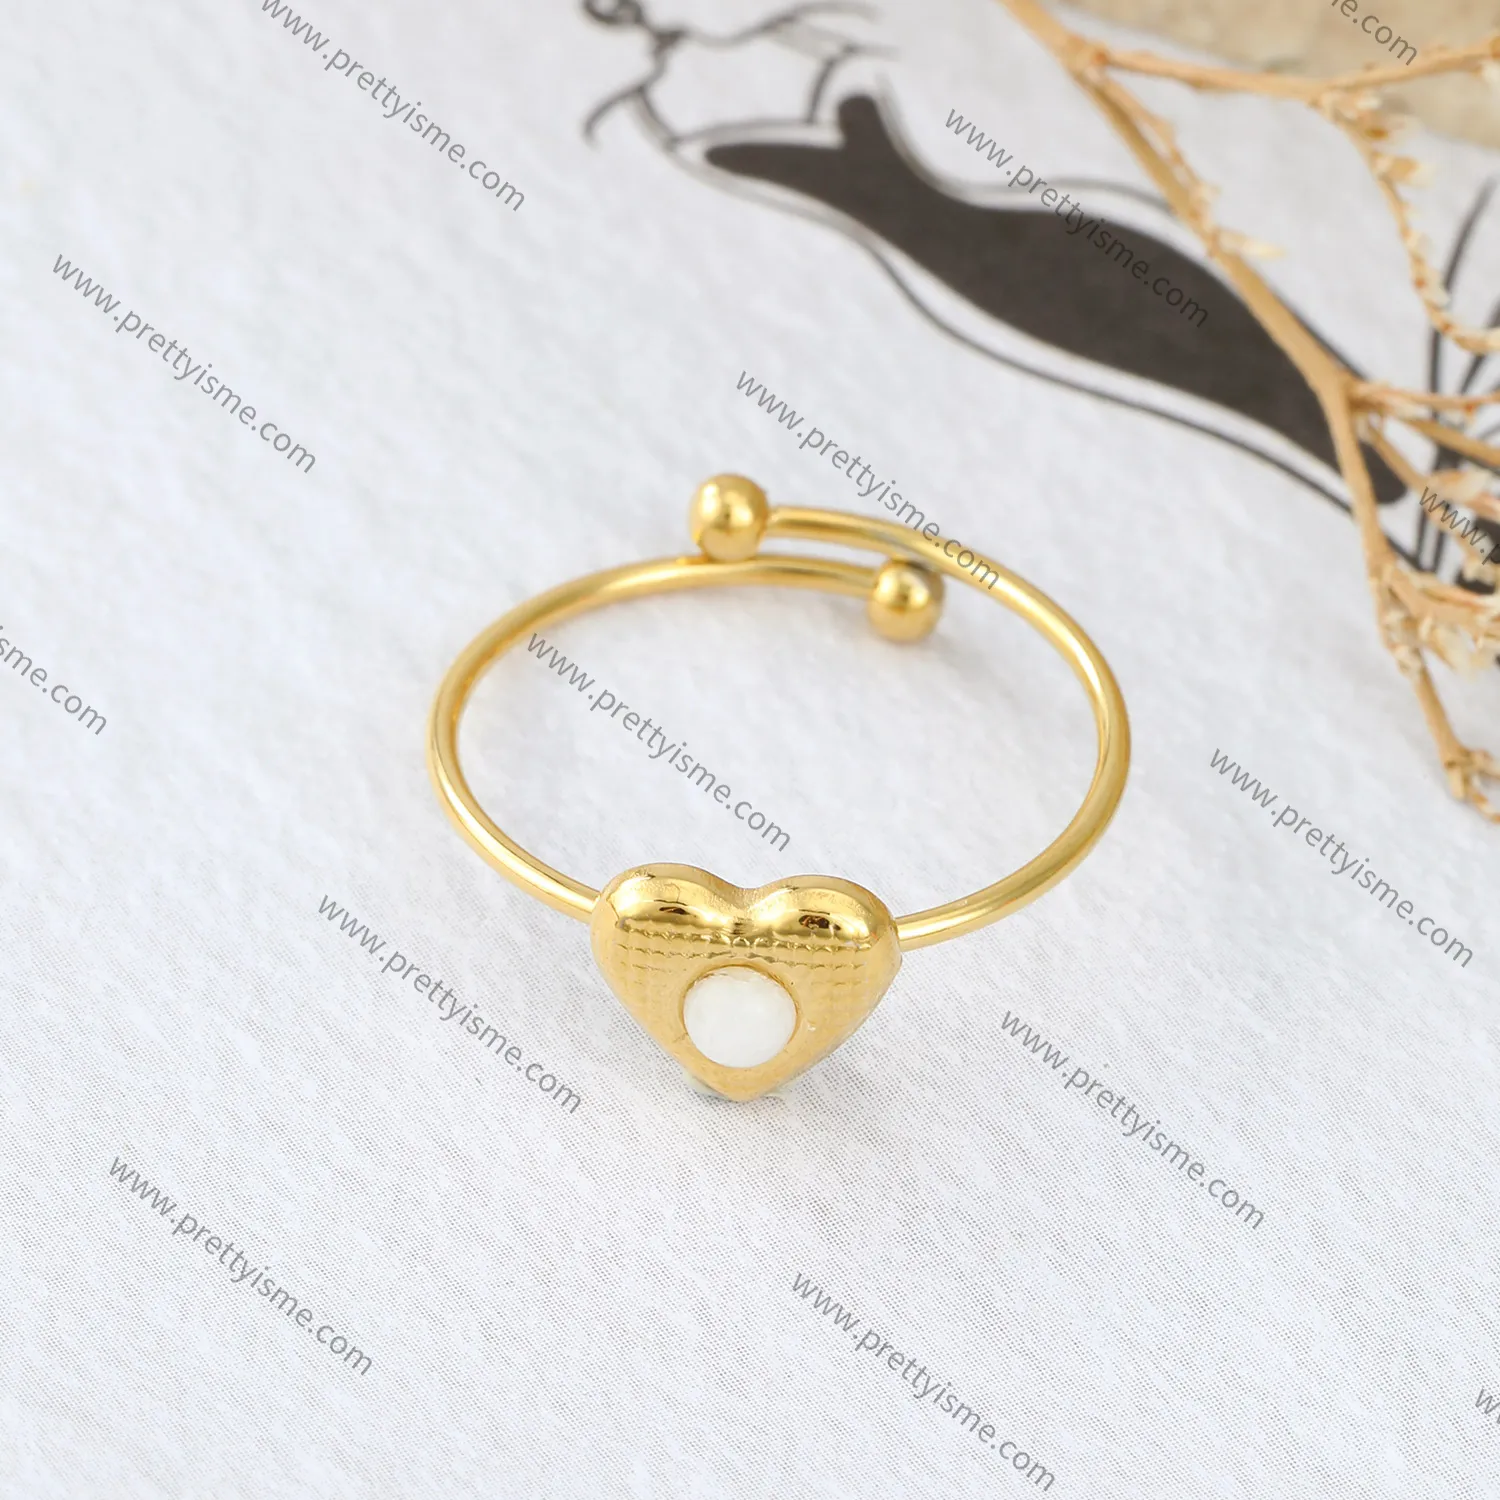 Lovely Stainless Steel Heart Ring in 18k Gold Plated Set with White Stones Open Ring.webp